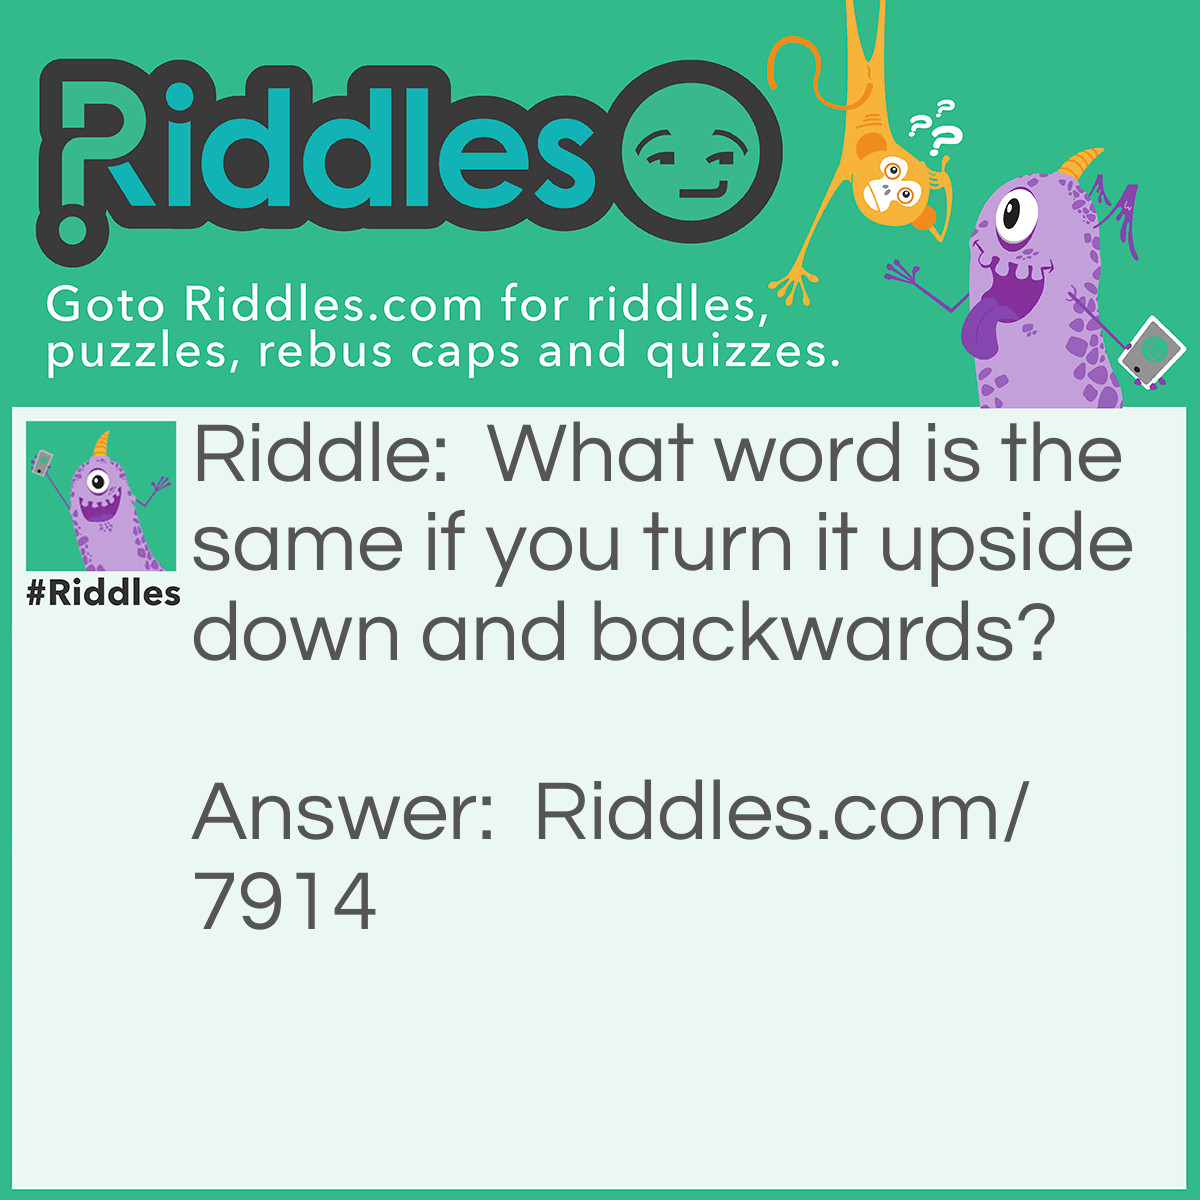 Riddle: What word is the same if you turn it upside down and backwards? Answer: suns.